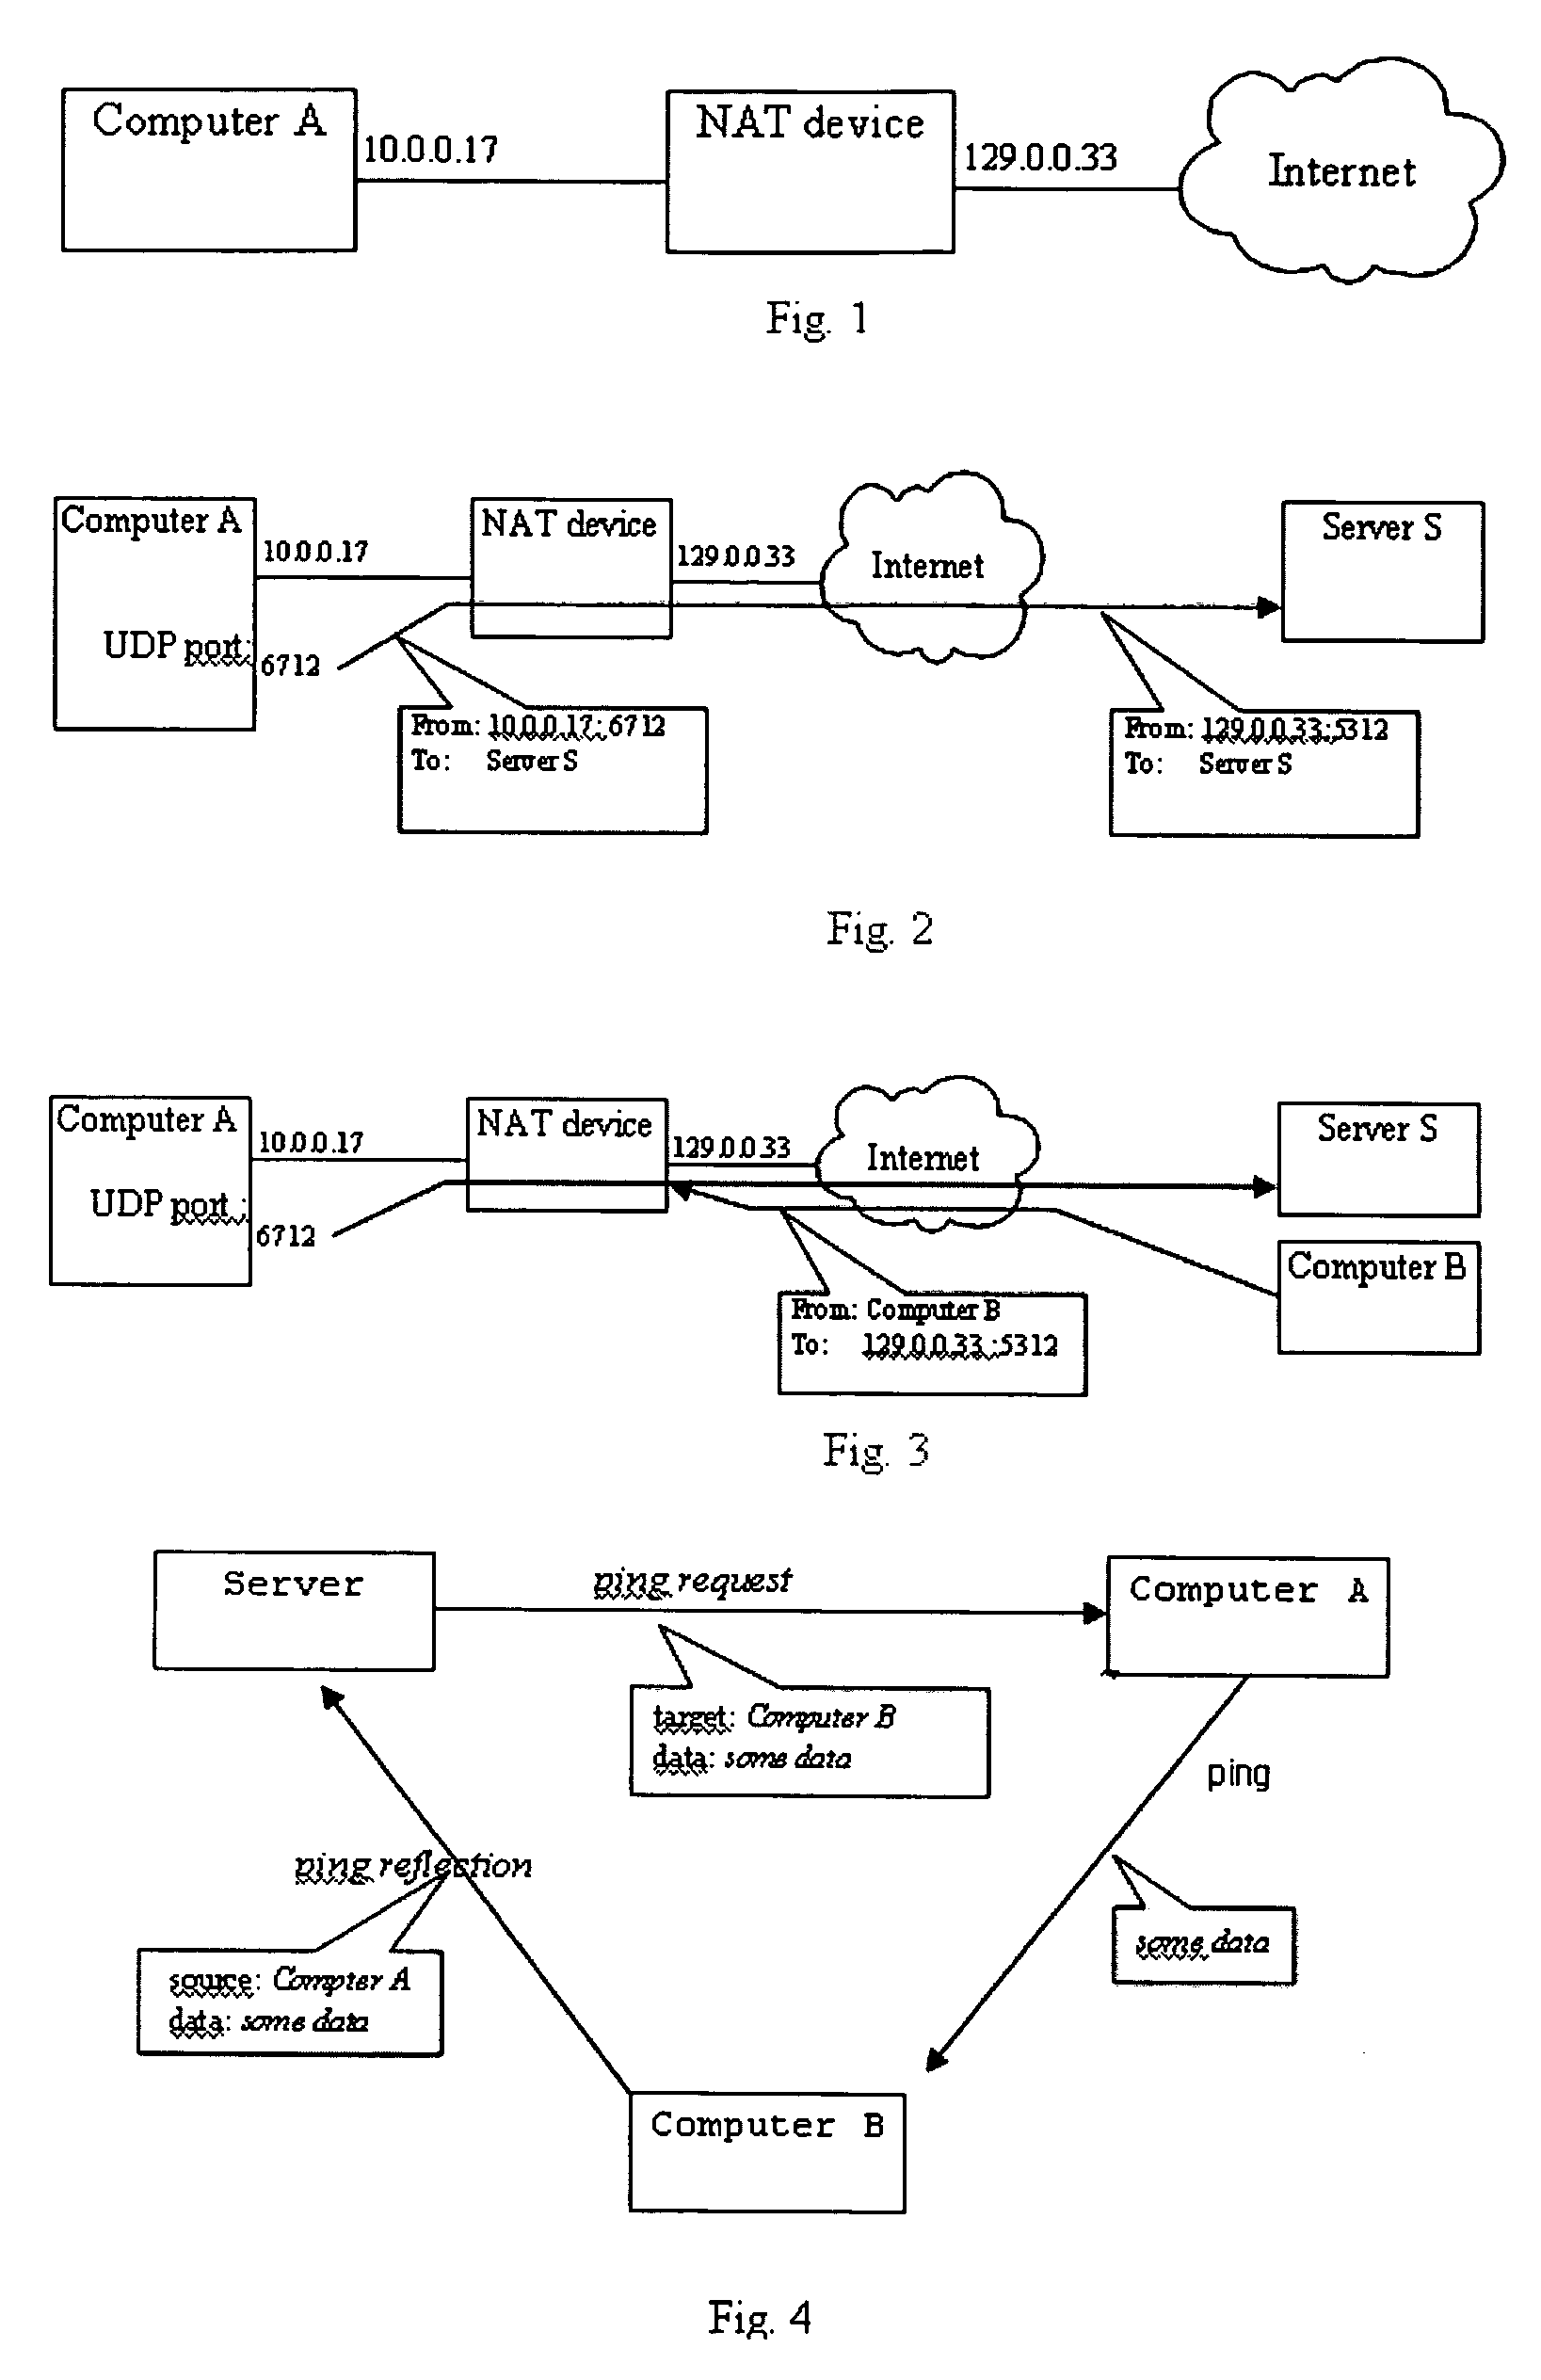 Server-mediated setup and maintenance of peer-to-peer client computer communications